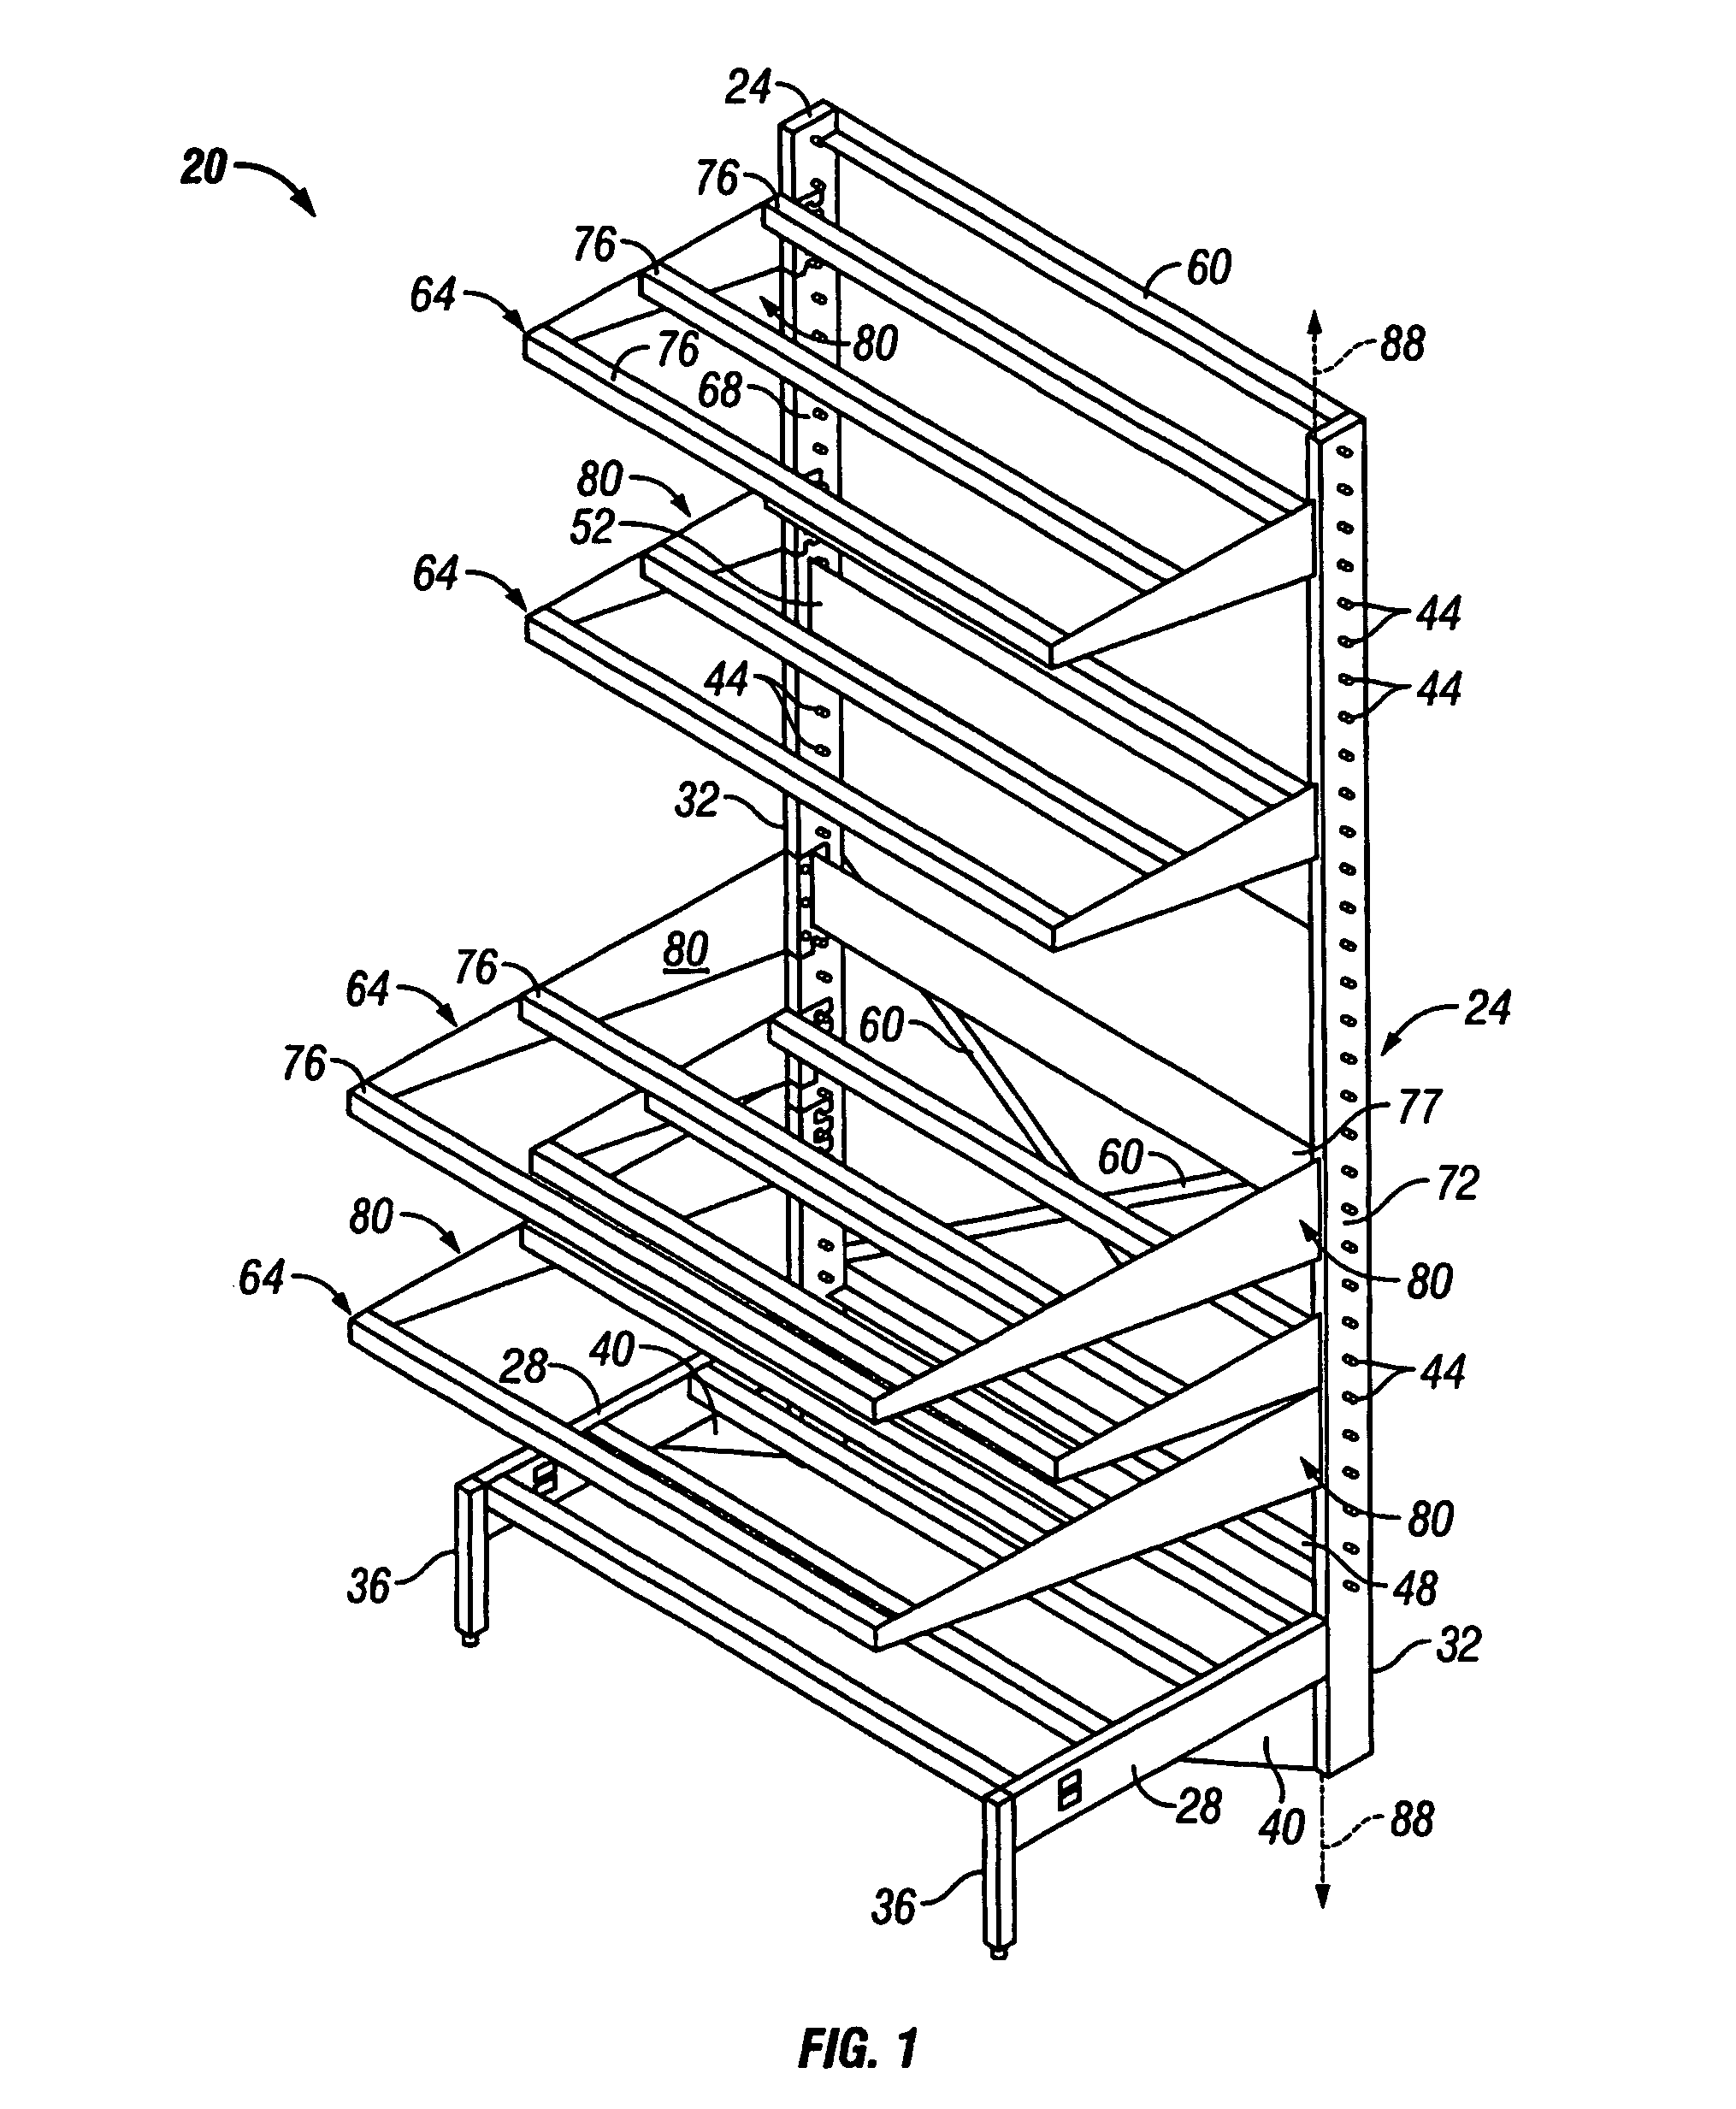 Modular cantilevered shelving assembly and method